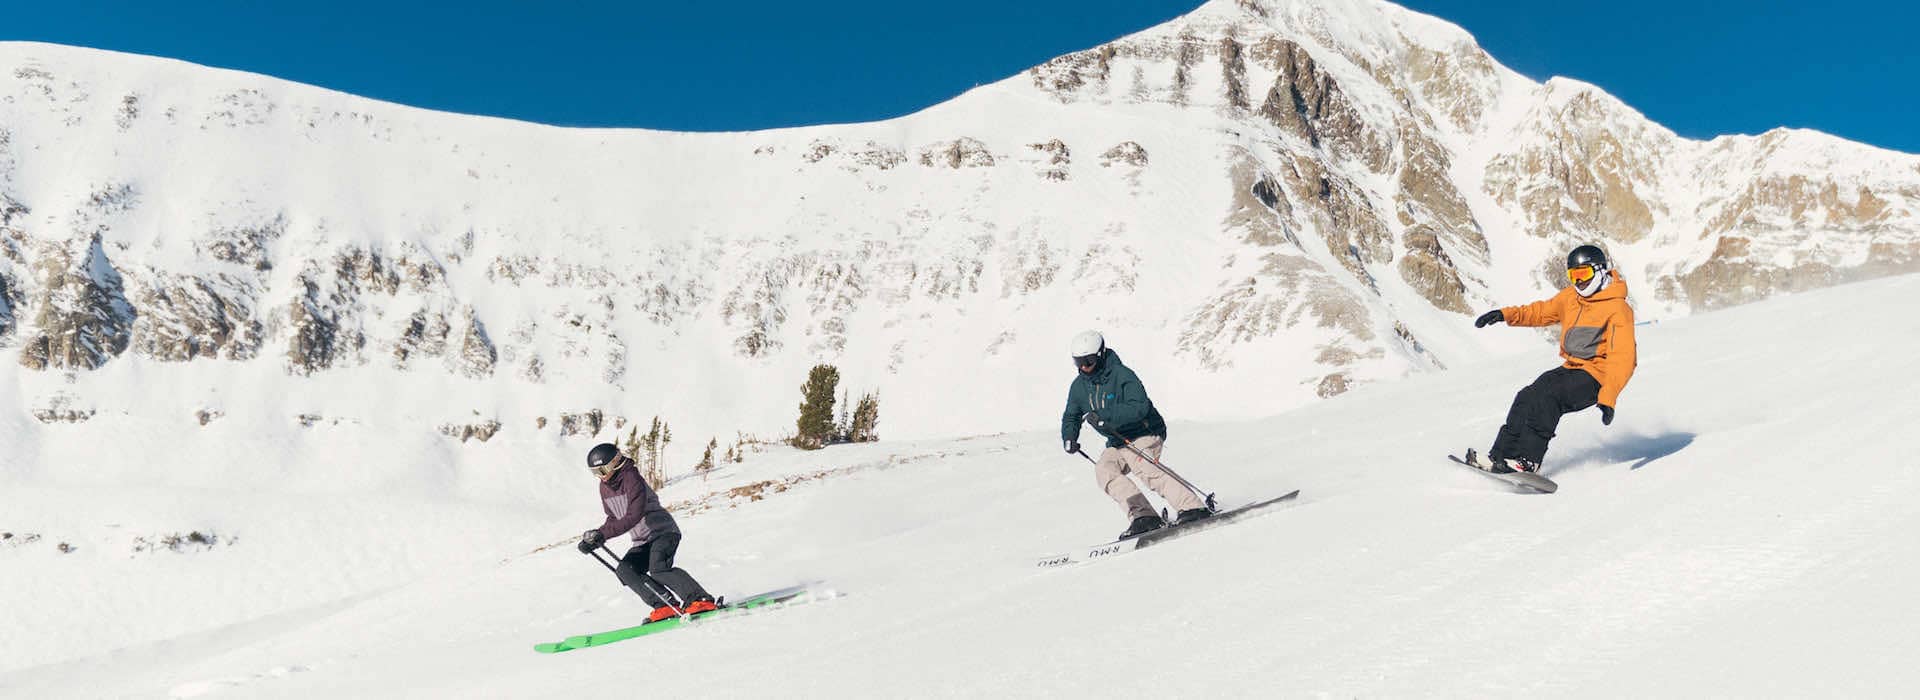 Skiers and snowboarders | Rent skis and snowboards in Big Sky